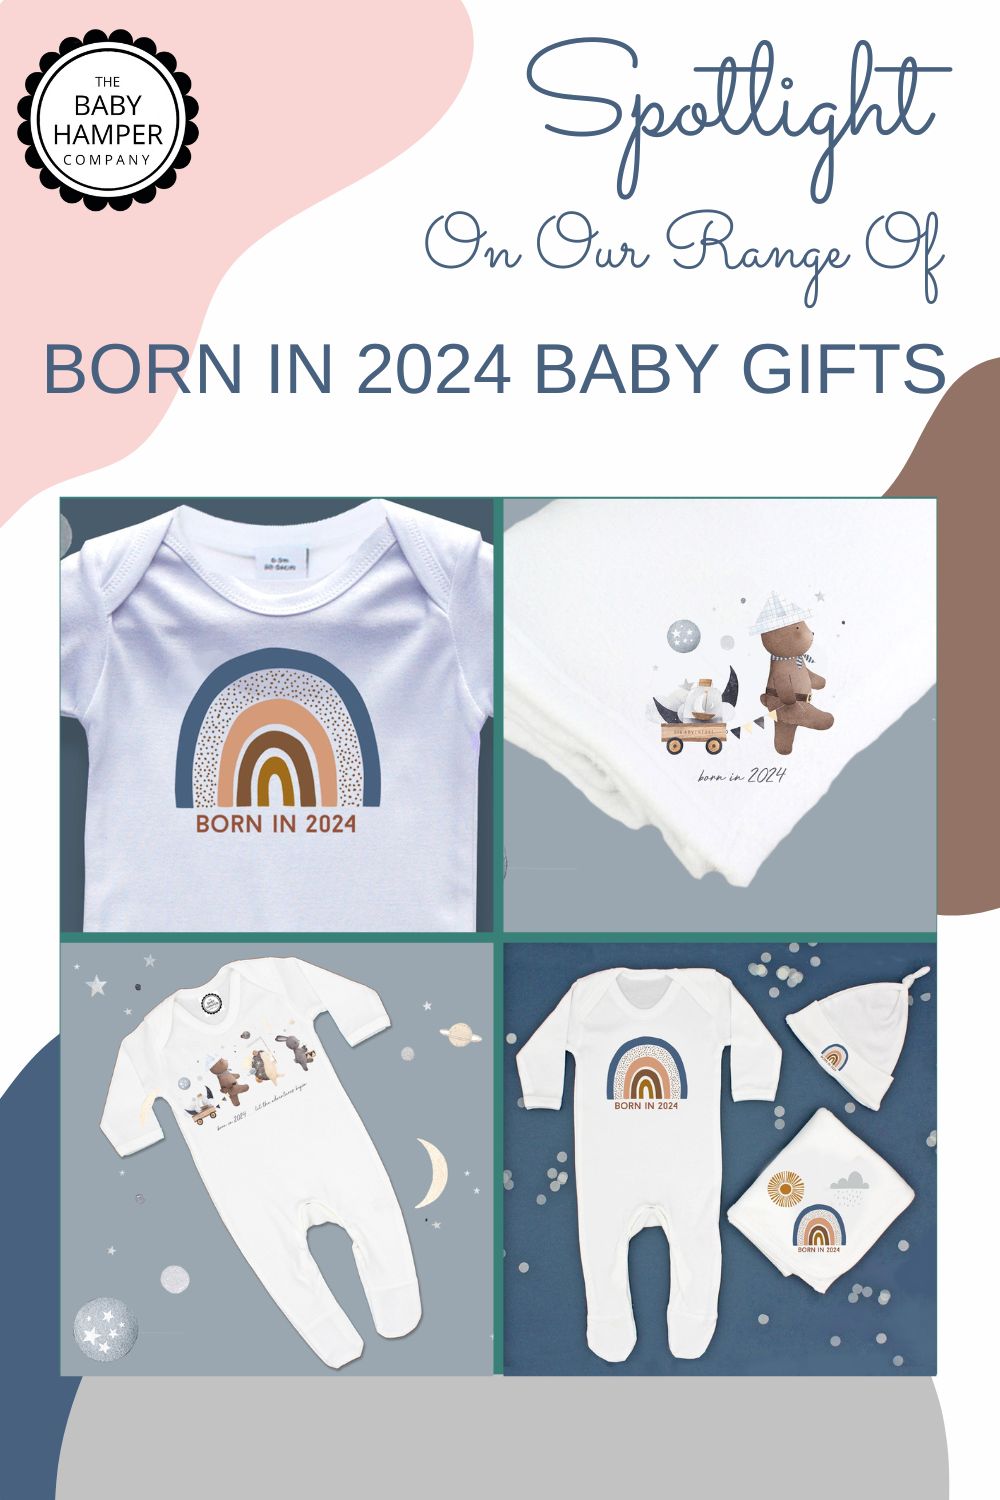 Spotlight On Our Range Of BORN IN 2024 BABY GIFTS